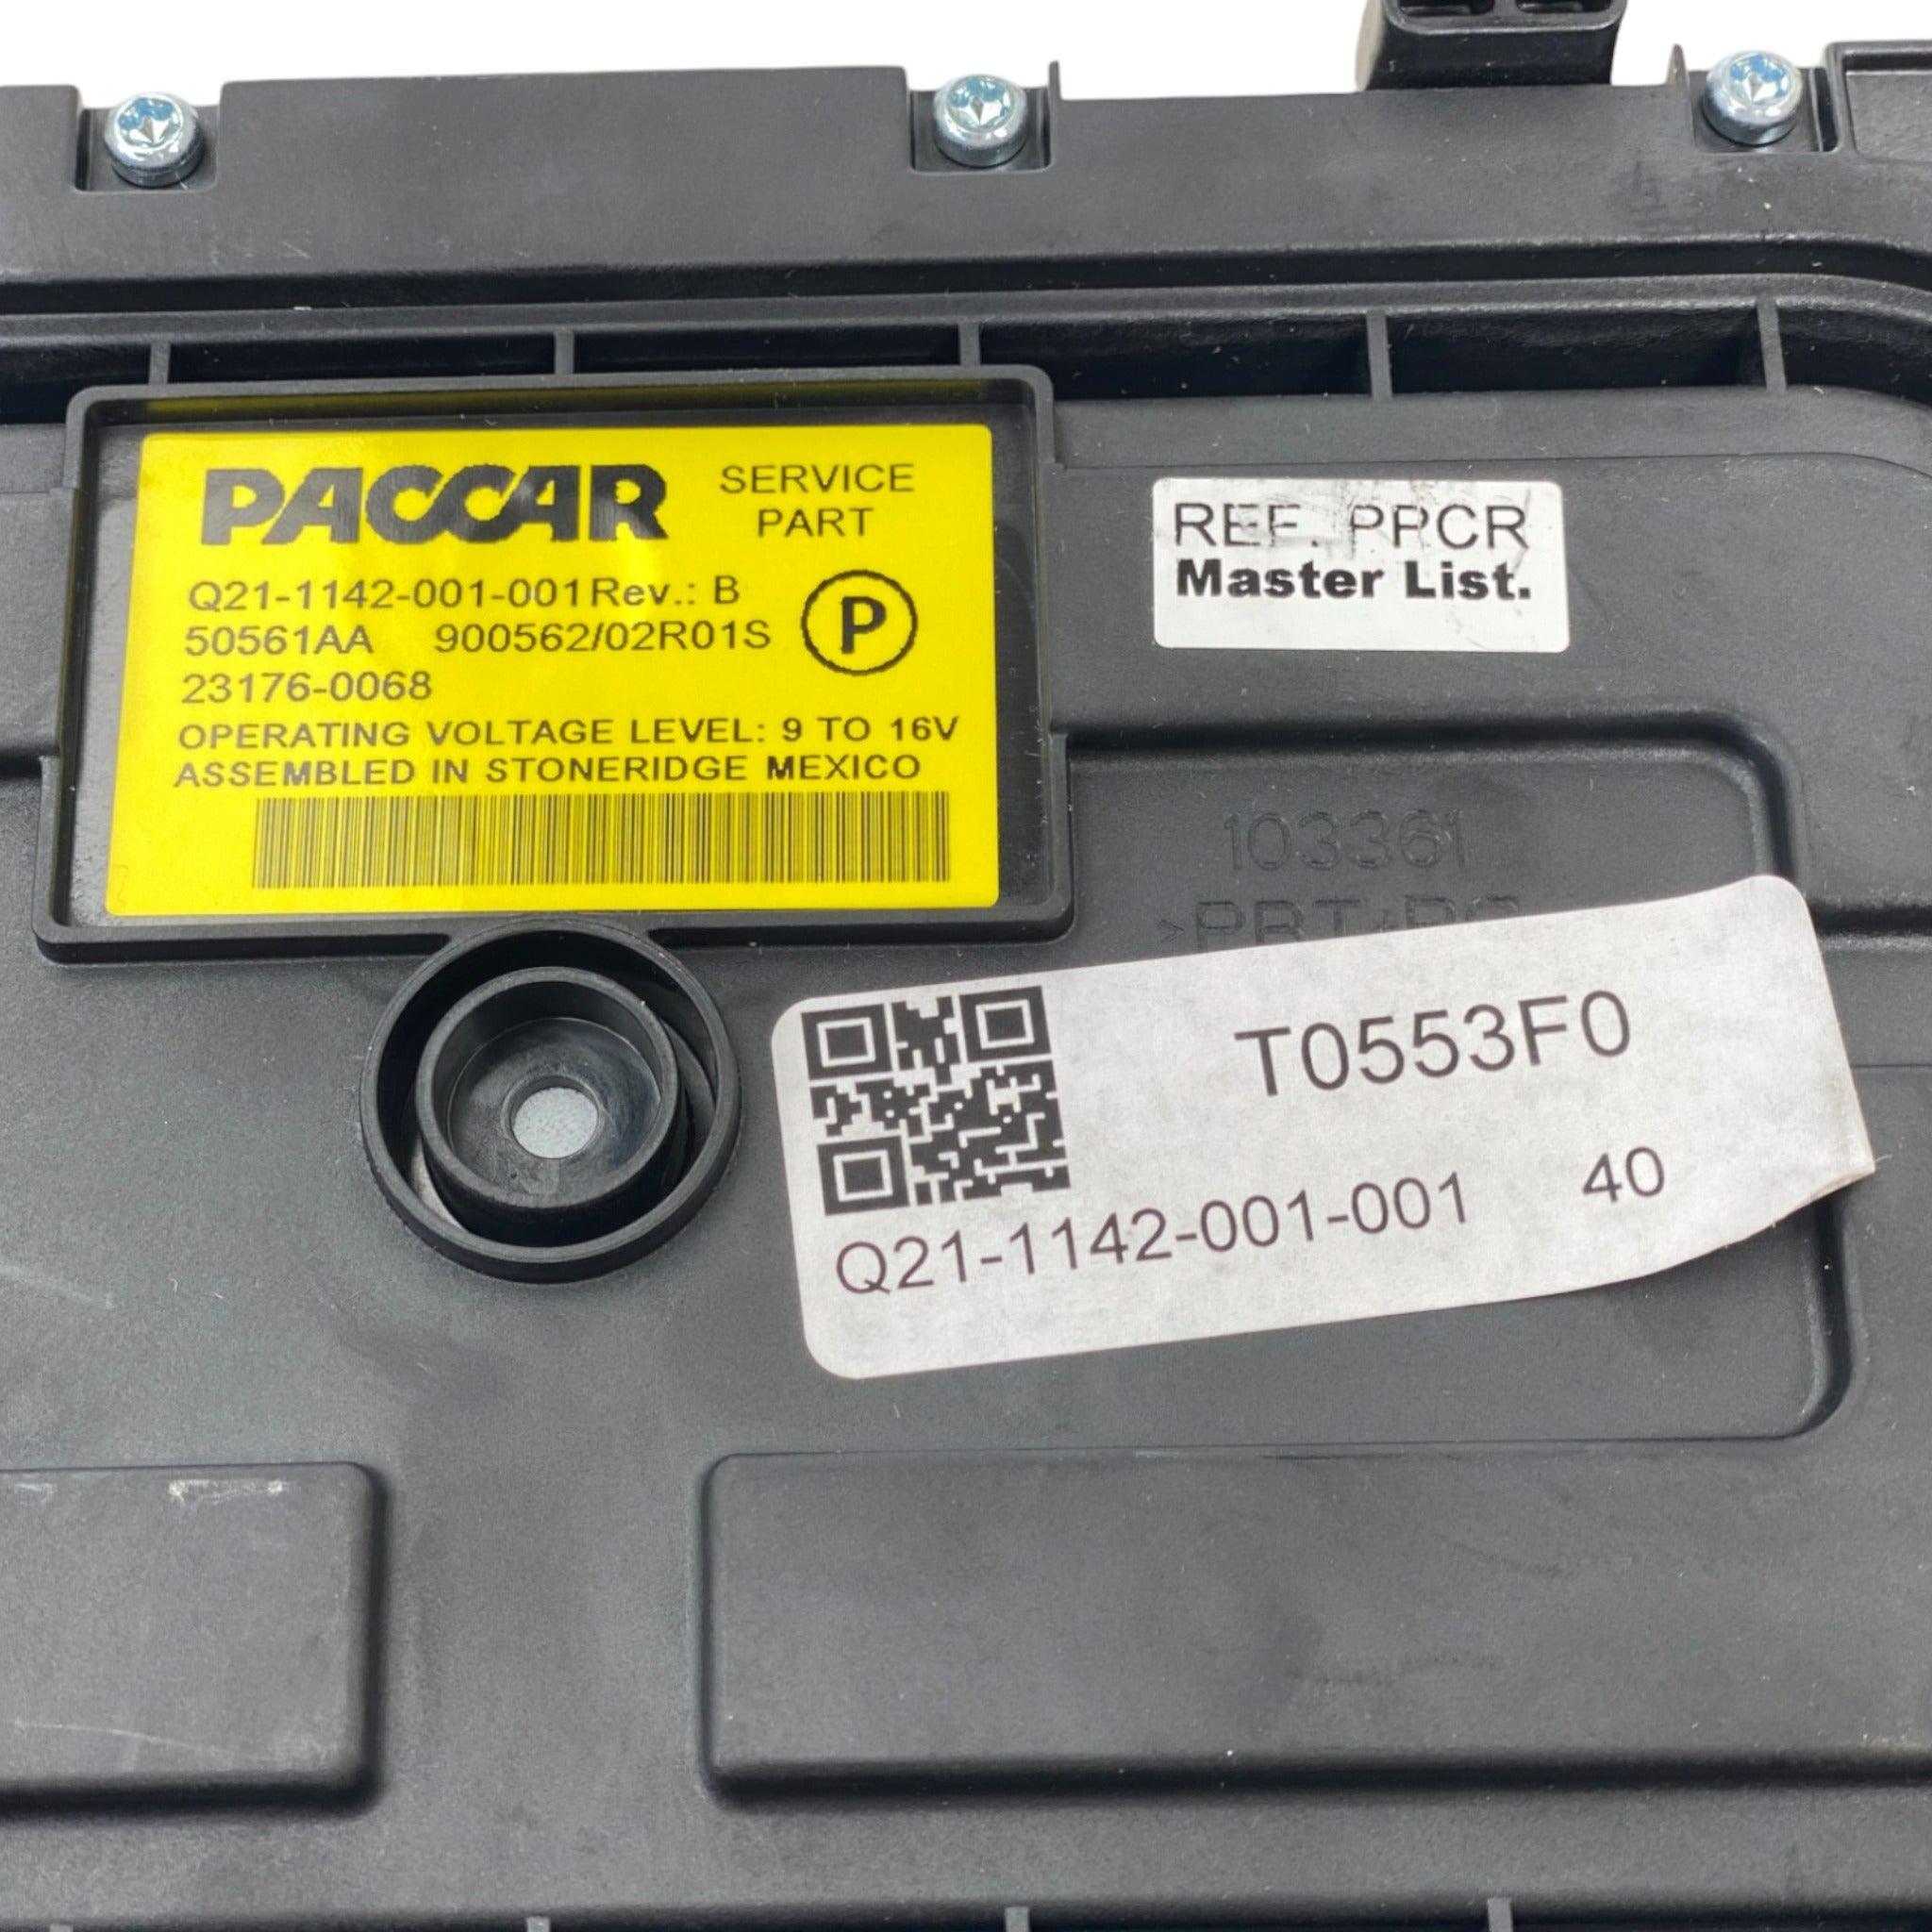 Q21-1142-001-001 Genuine Paccar Ecm Chassis Module Primary - ADVANCED TRUCK PARTS